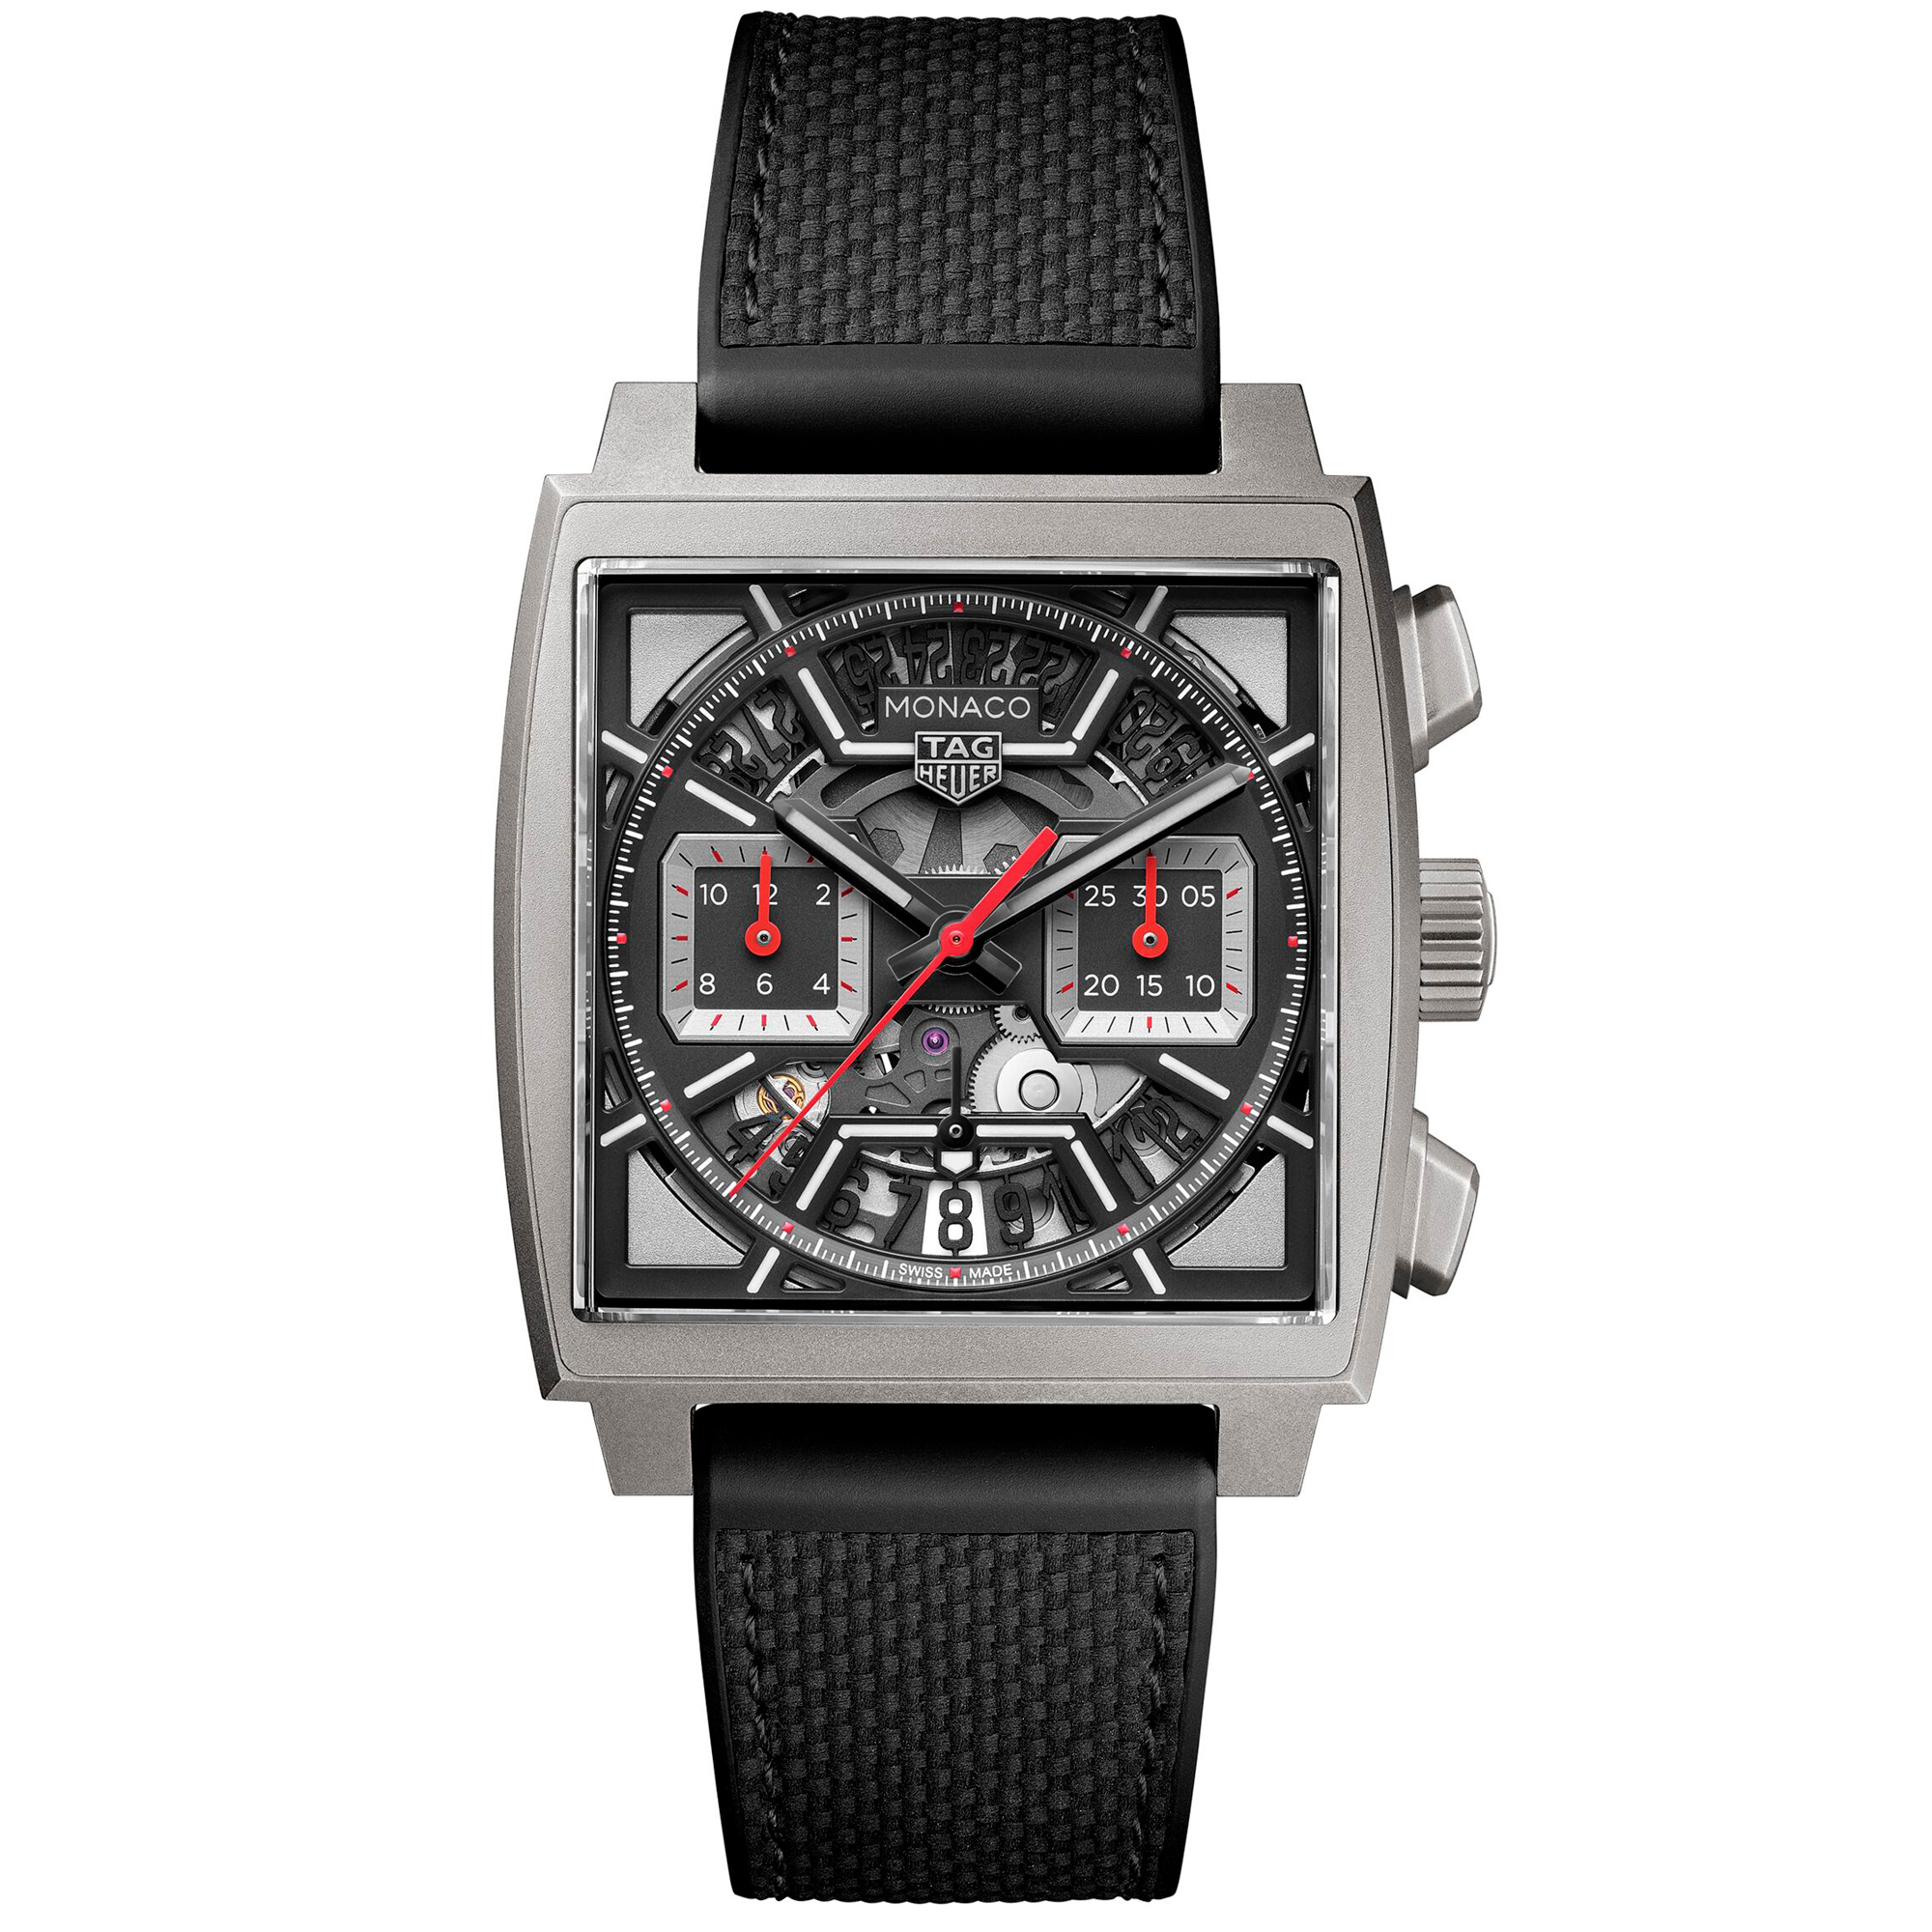 TAG Heuer MONACO Calibre HEUER 02 Automatic Chronograph Limited Edition Watch 39mm - CBL2183.FT6236